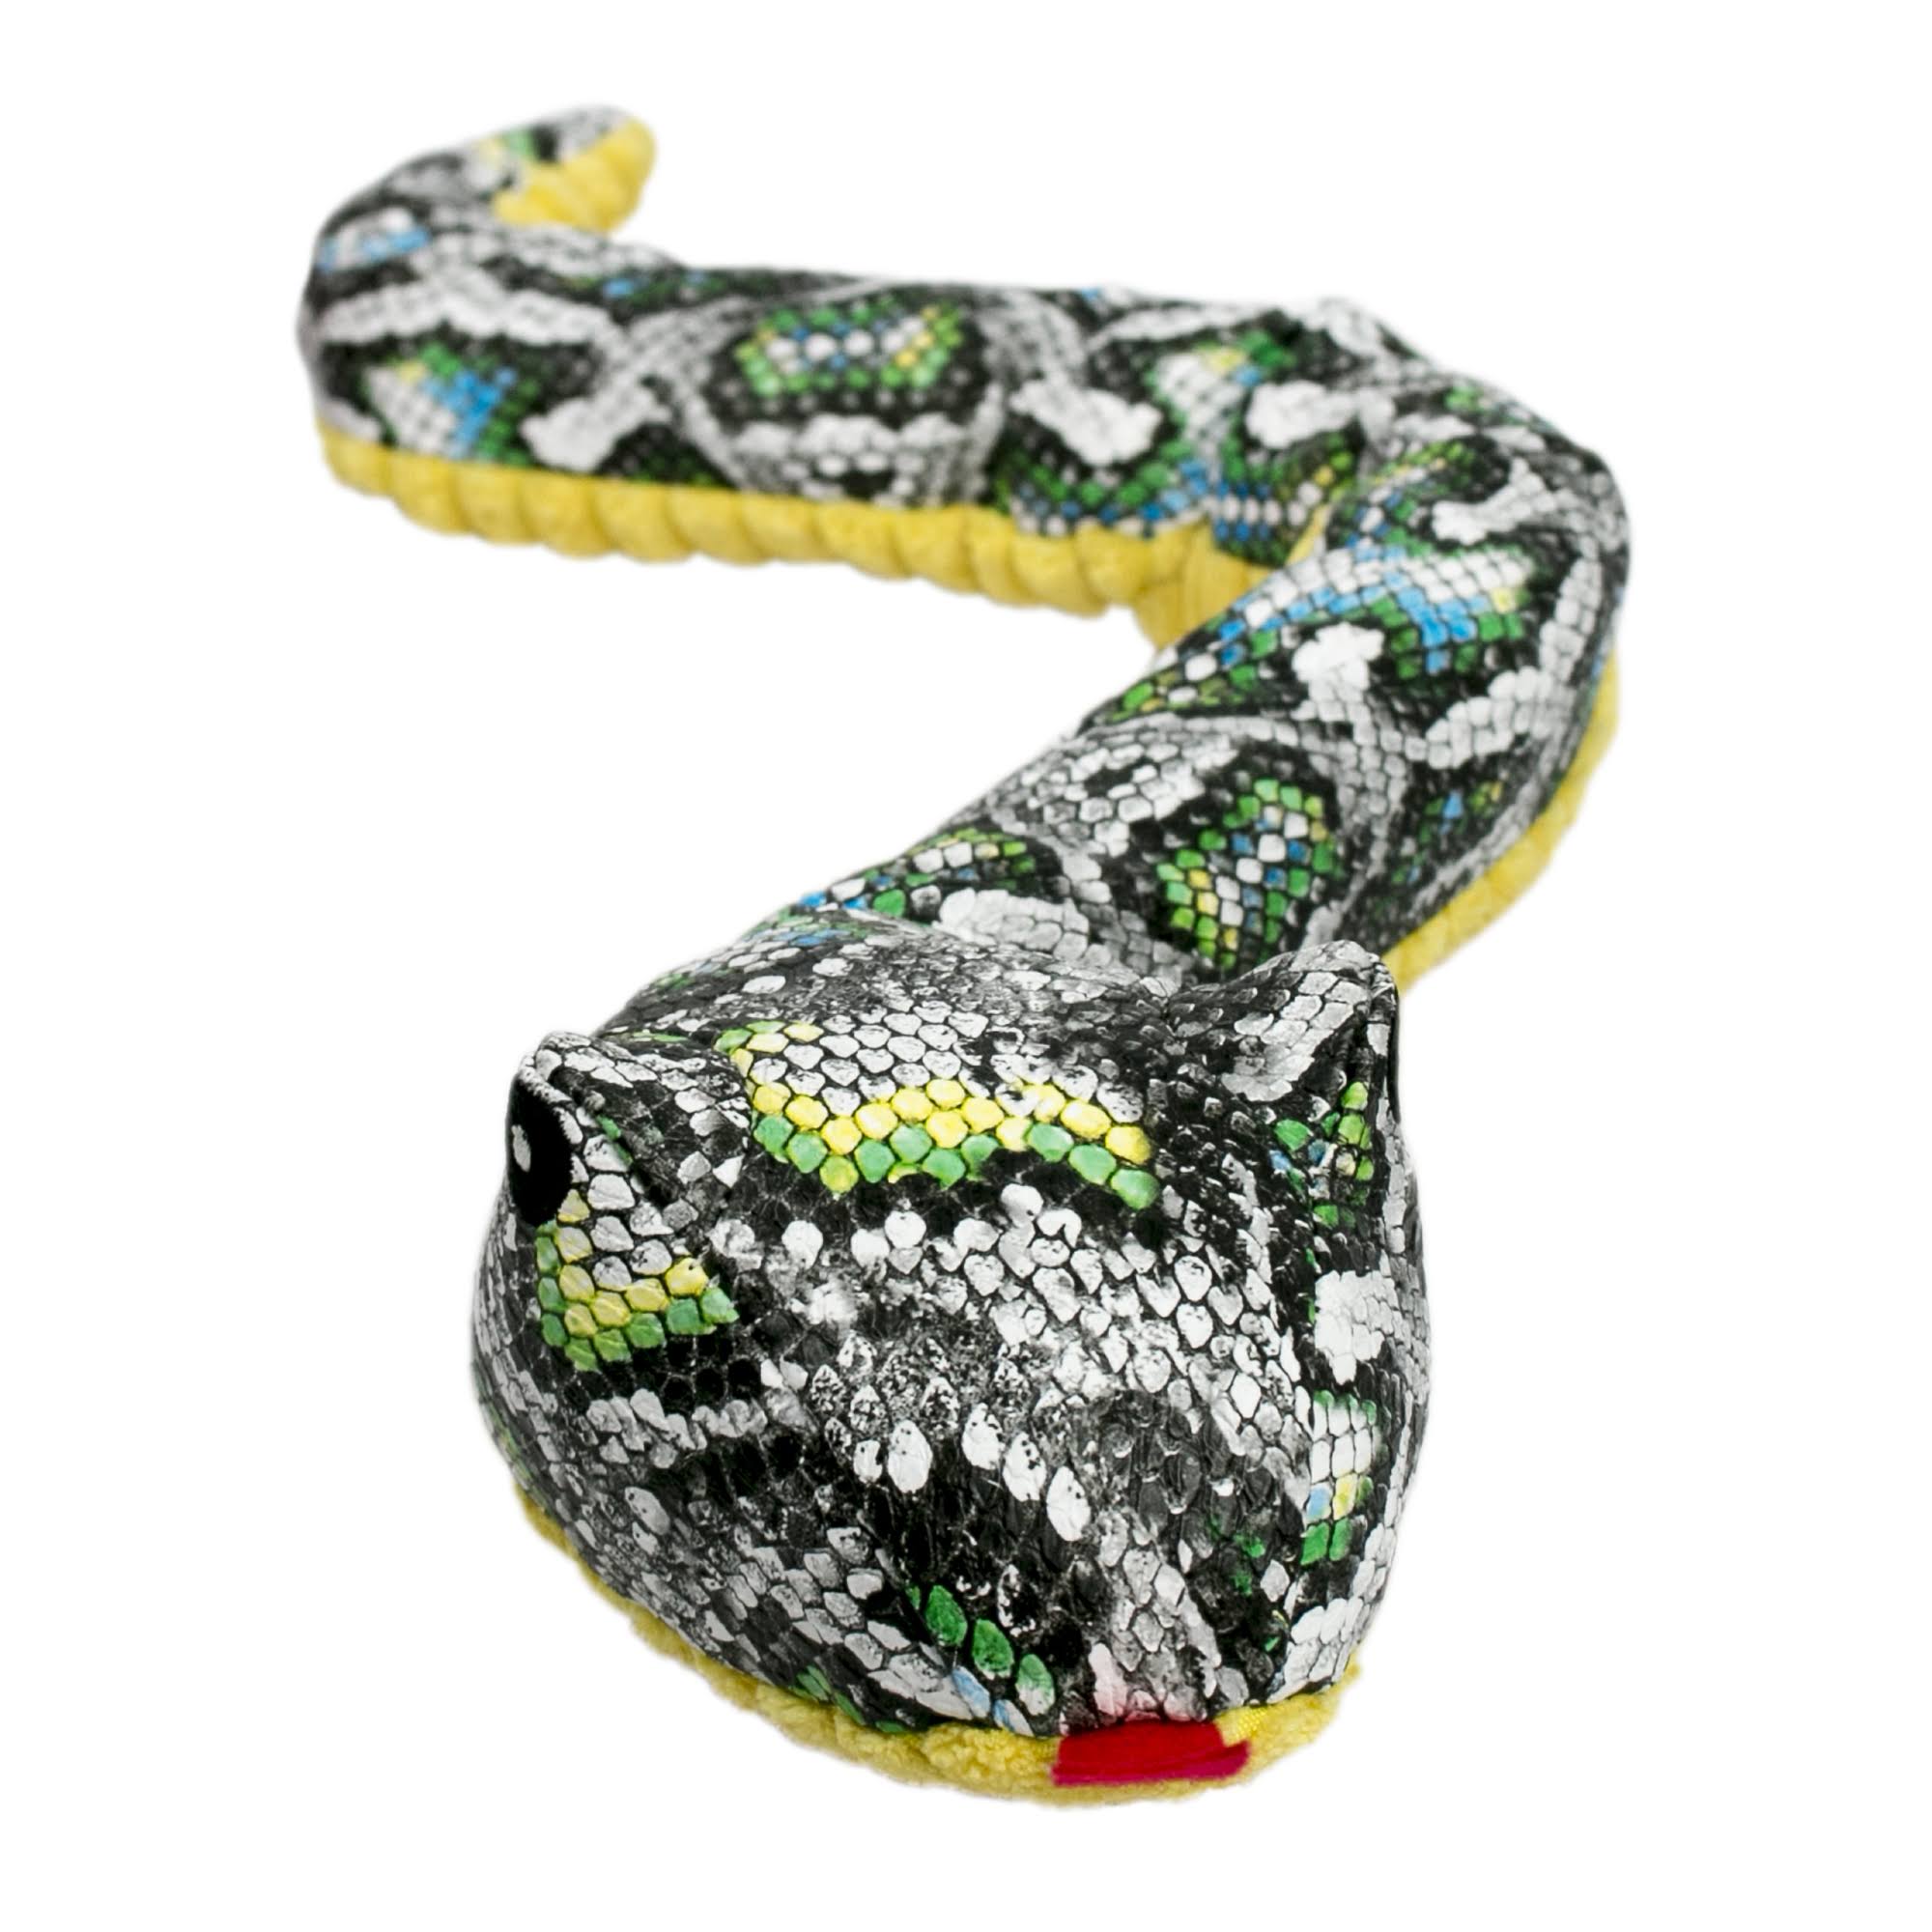 Tall Tails Crunch Snake Dog Toy, 23-in